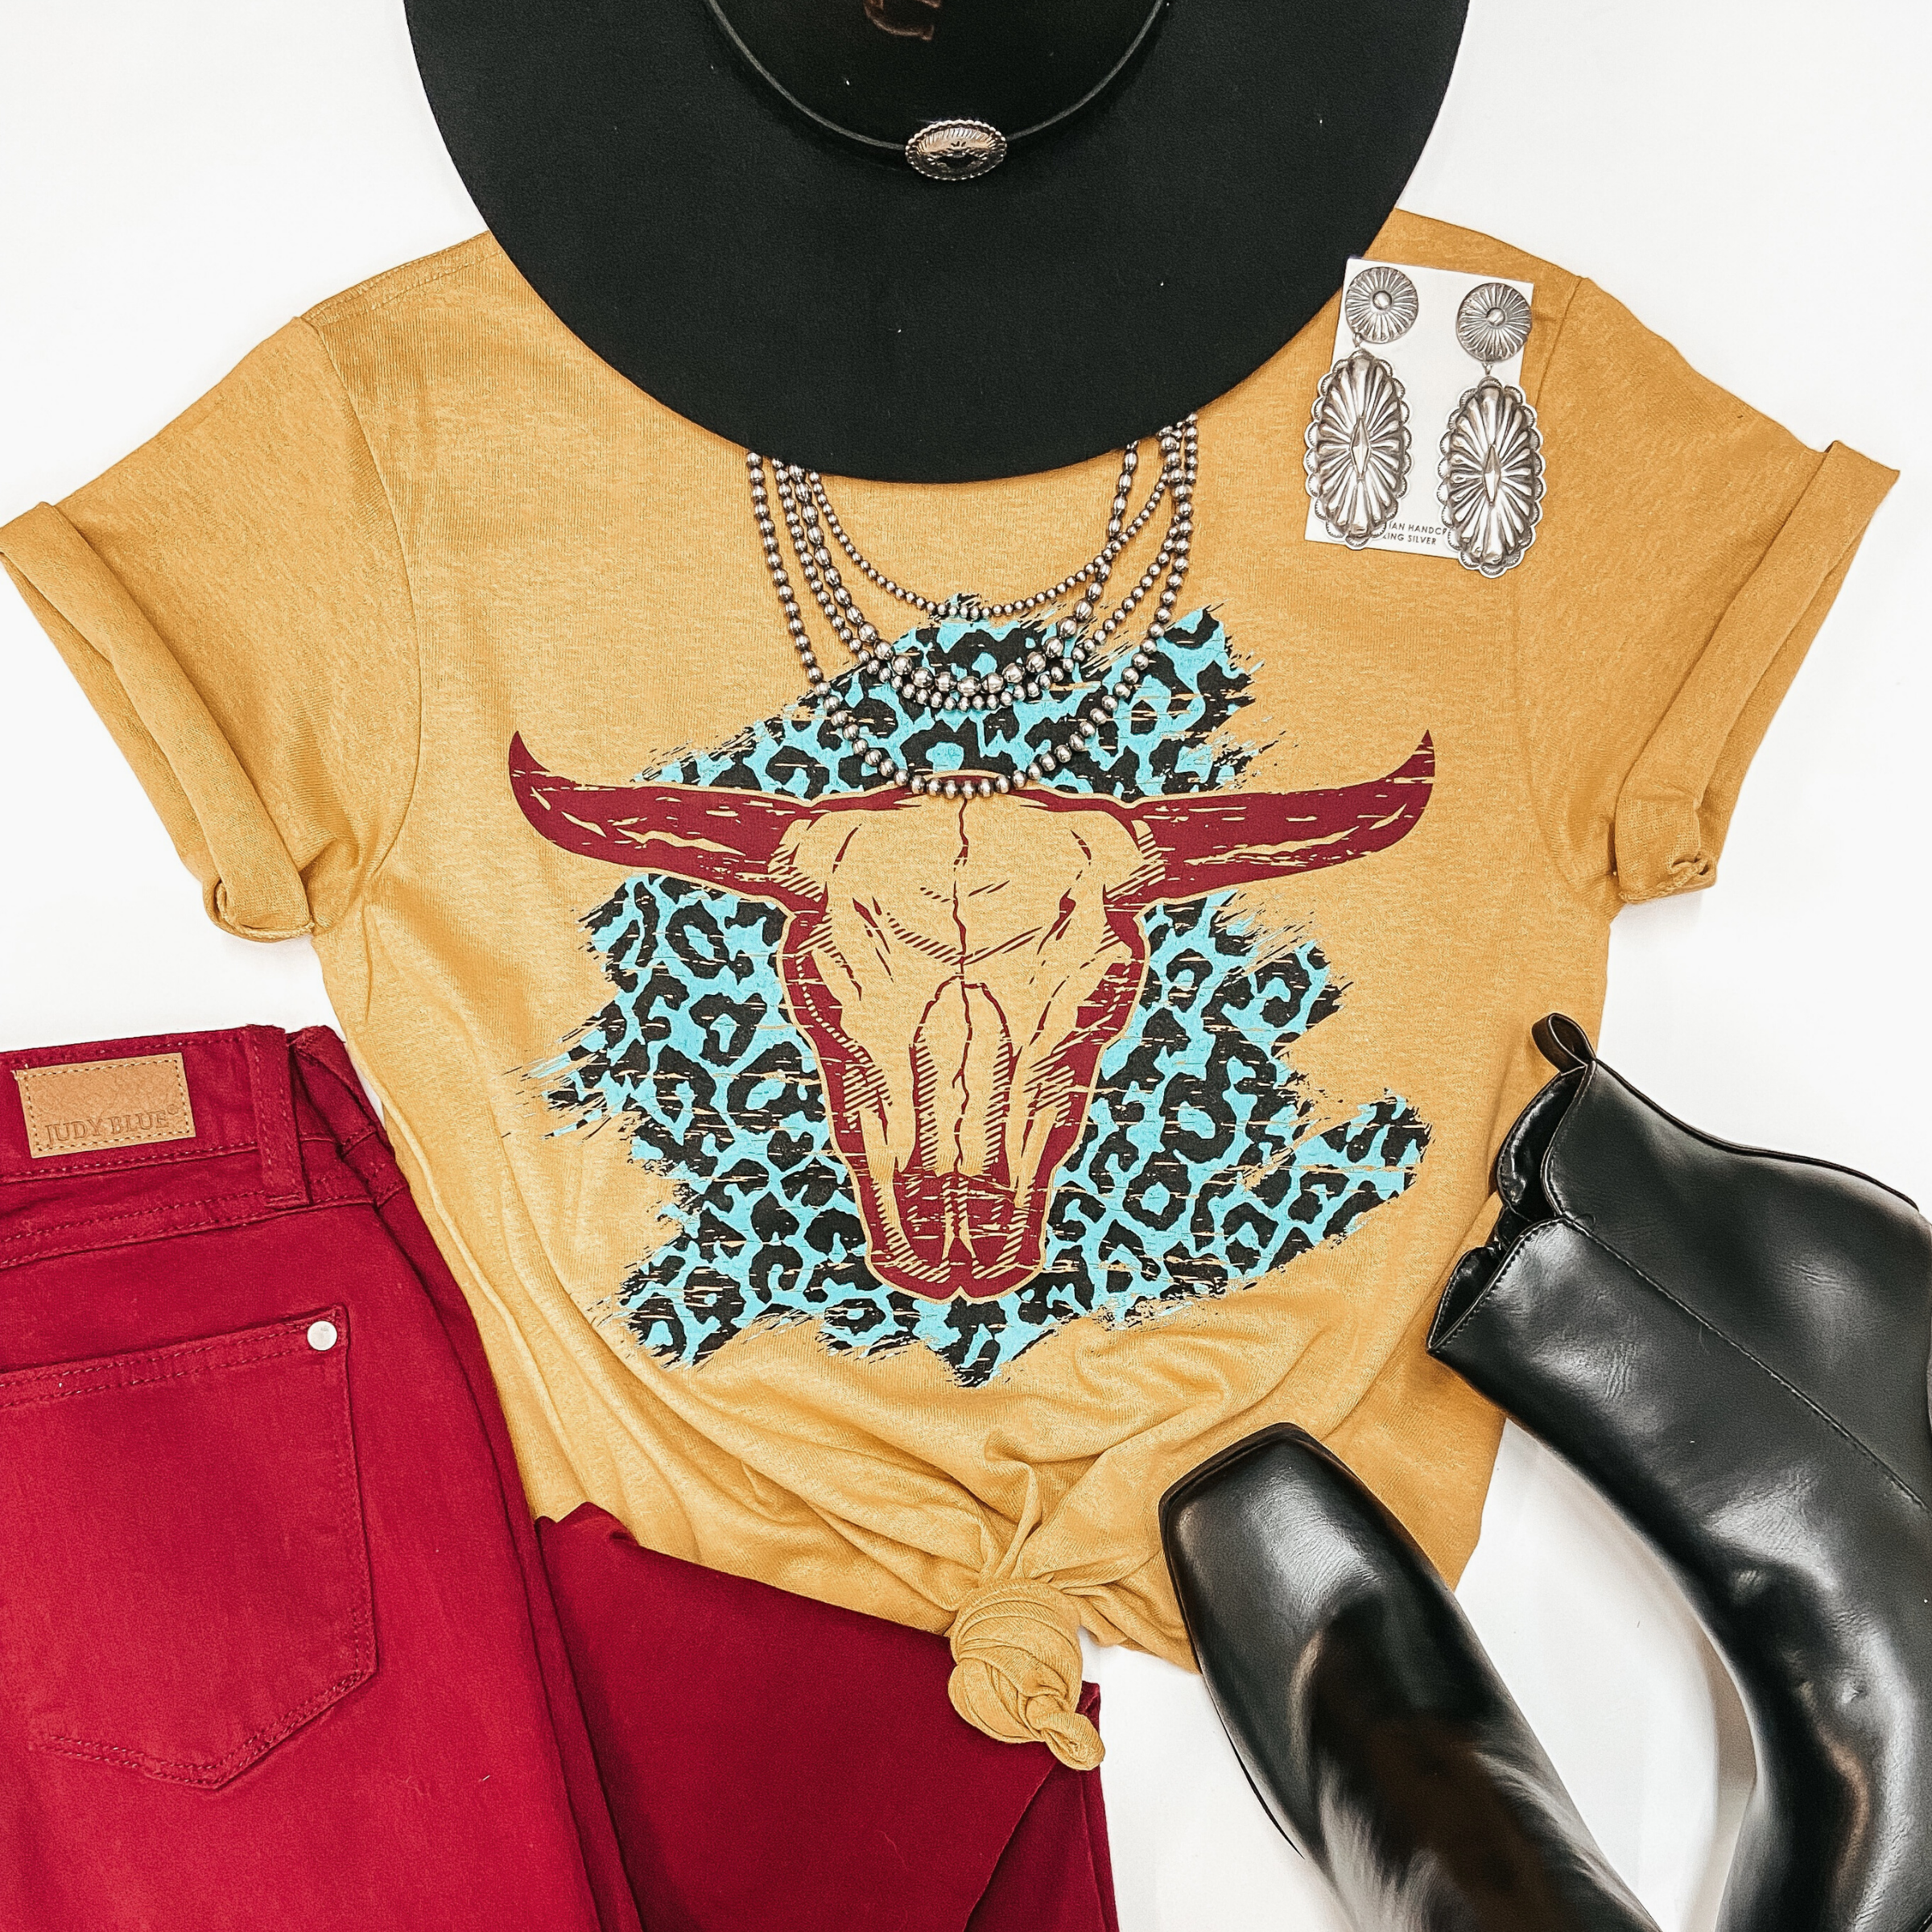 A mustard yellow graphic tee with cuffed sleeves and a knotted front. The tee shirt has a mint leopard print graphic with a bull skull on top. Pictured on white background with black hat, maroon jeans, black booties, and sterling silver jewelry.